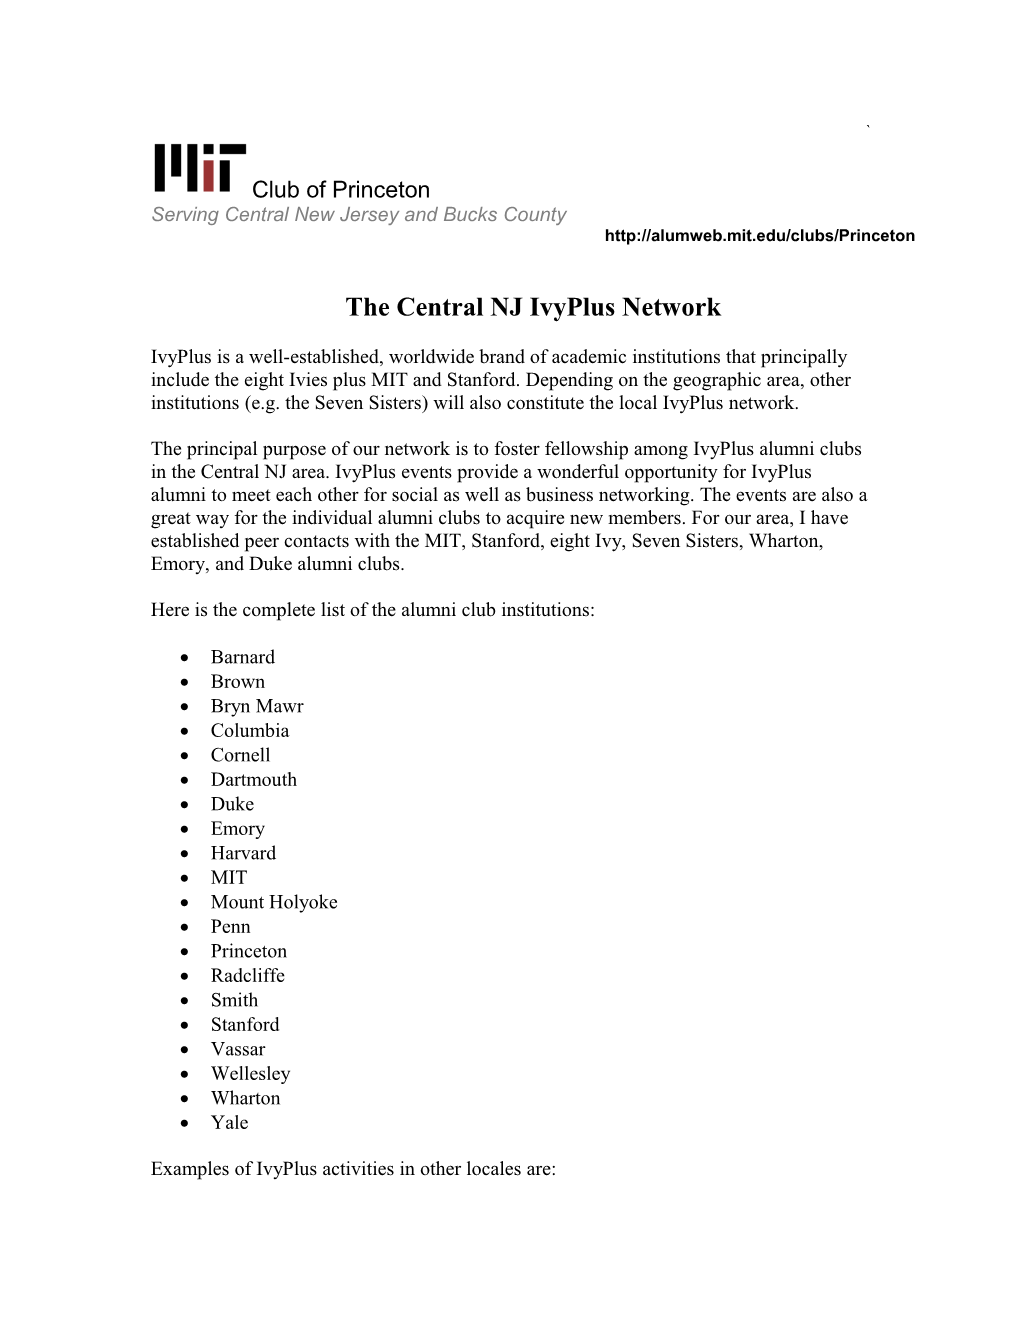 The Central NJ Ivyplus Network